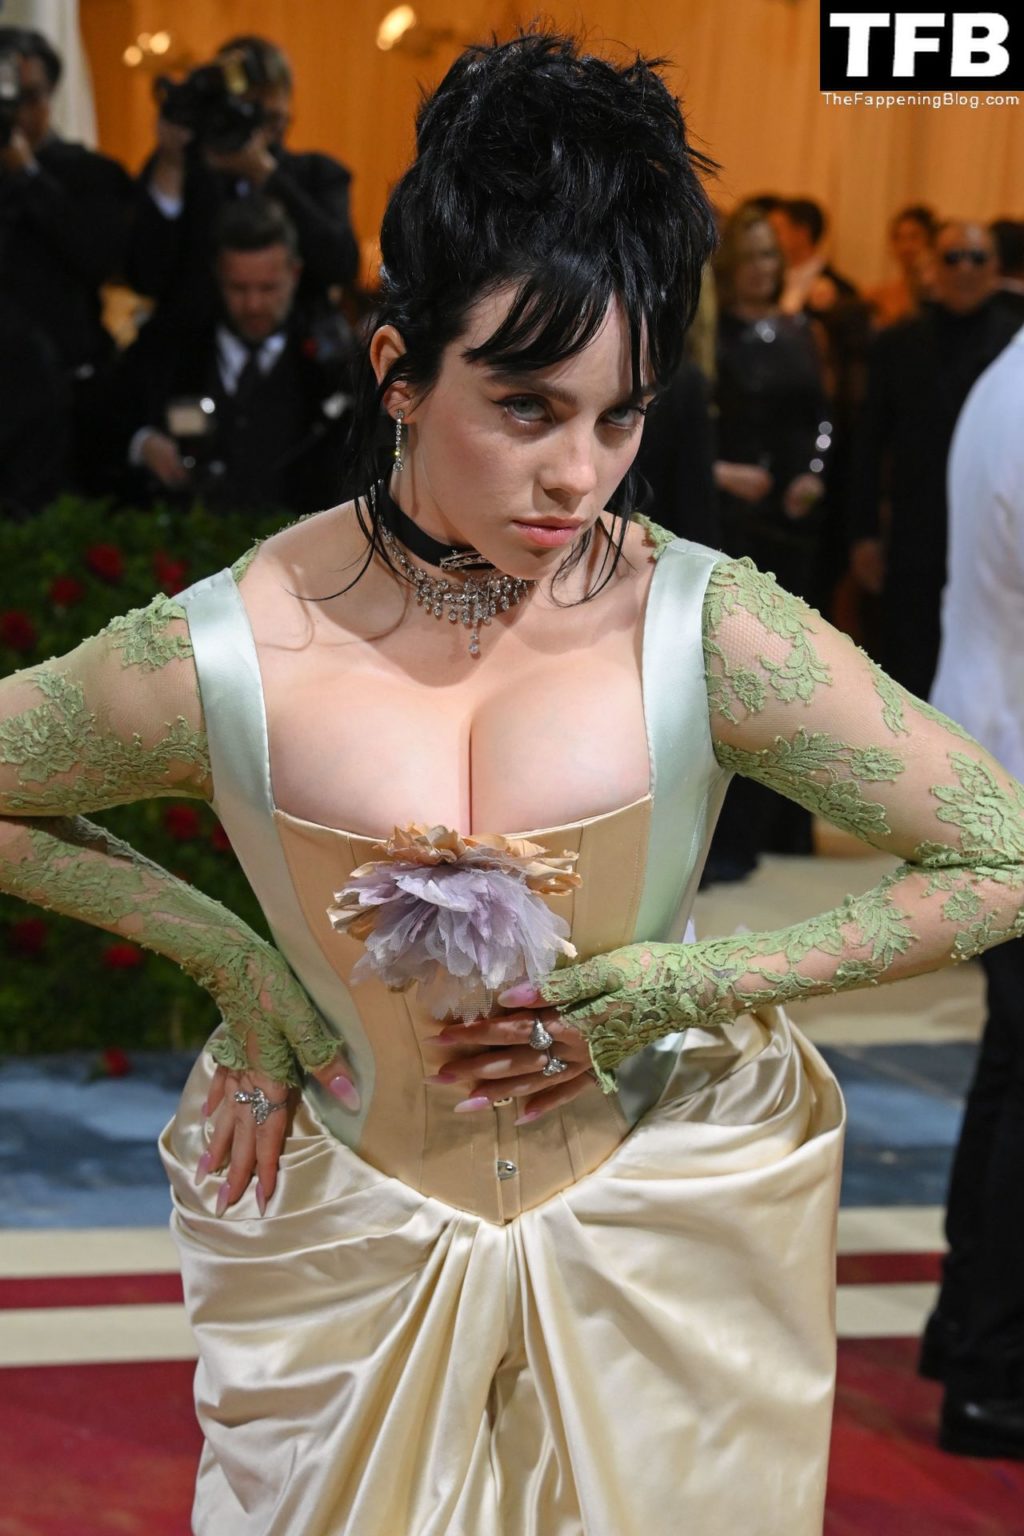 Billie Eilish Sexy The Fappening Blog 125 1024x1536 - Billie Eilish Showcases Nice Cleavage at The 2022 Met Gala in NYC (155 Photos)